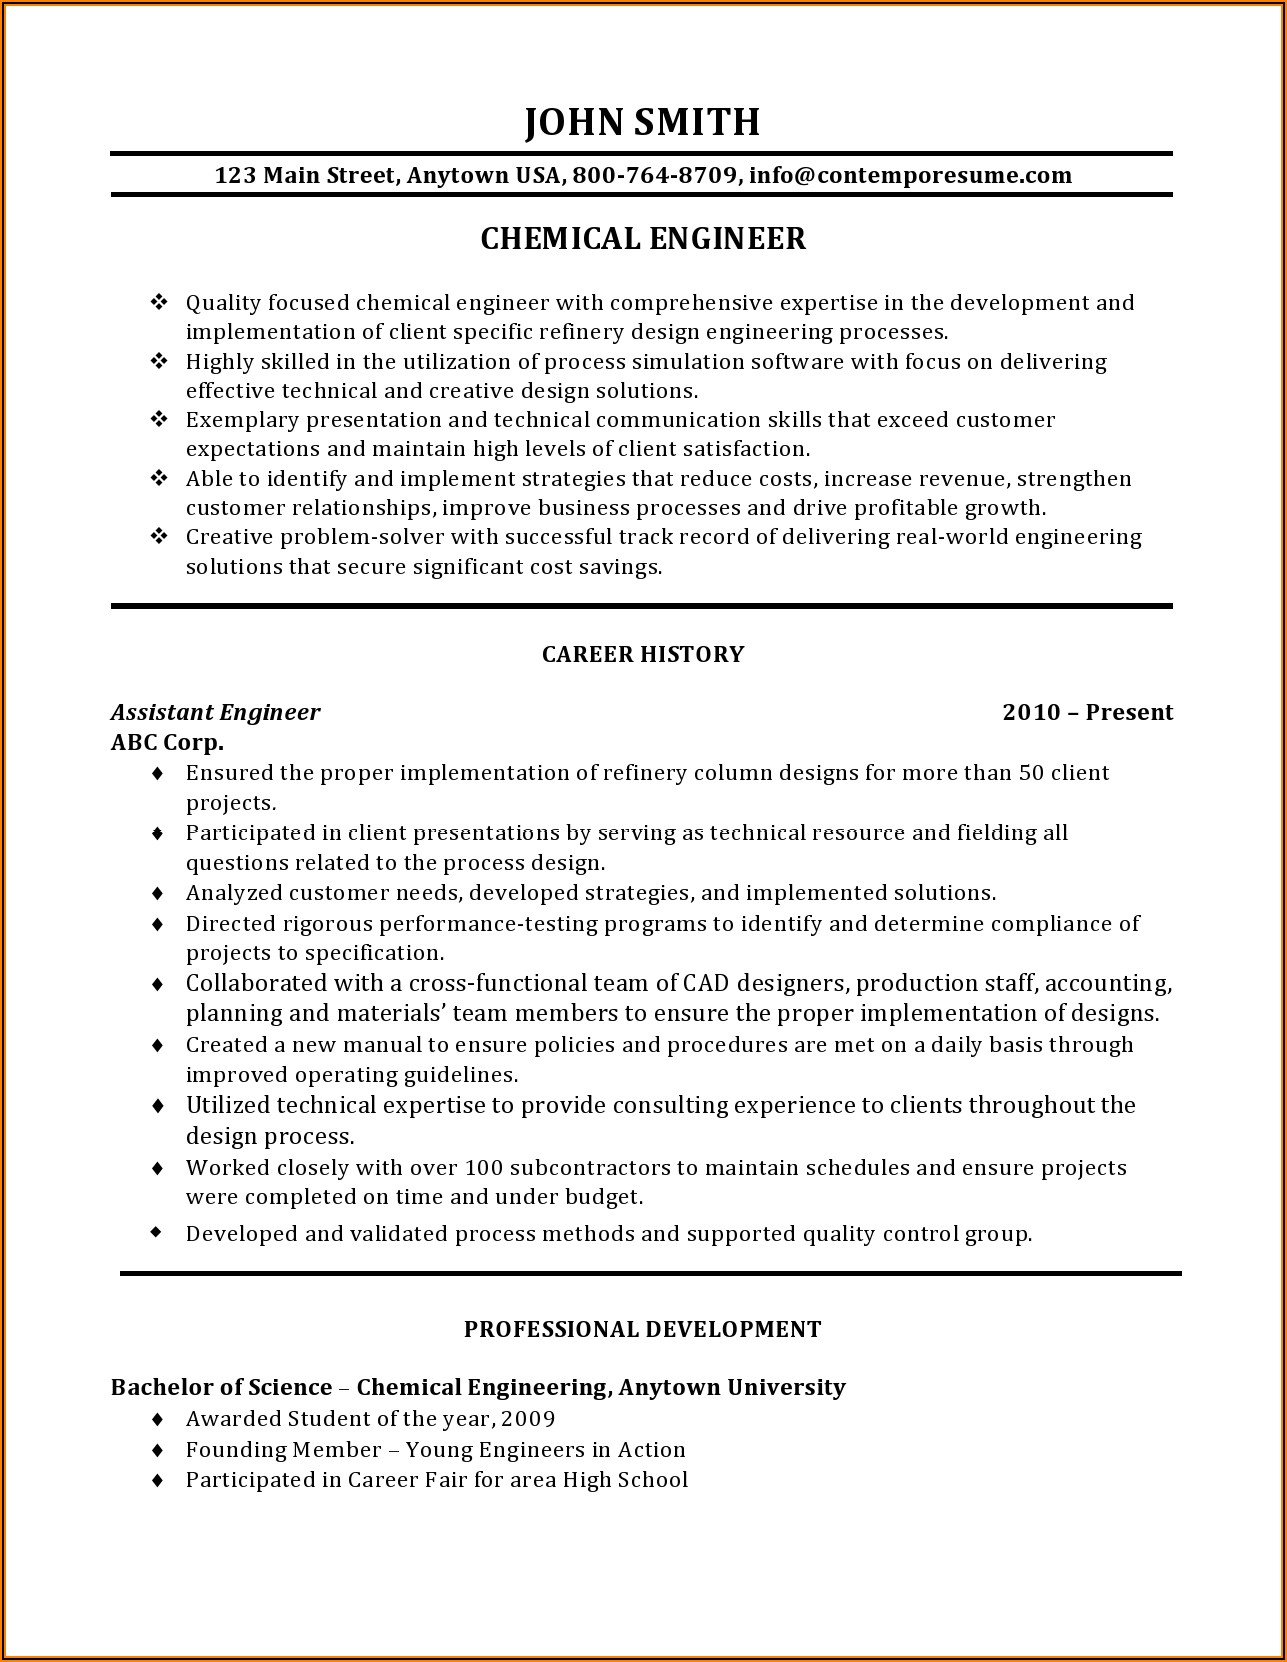 Free Resume Templates For Engineering Students